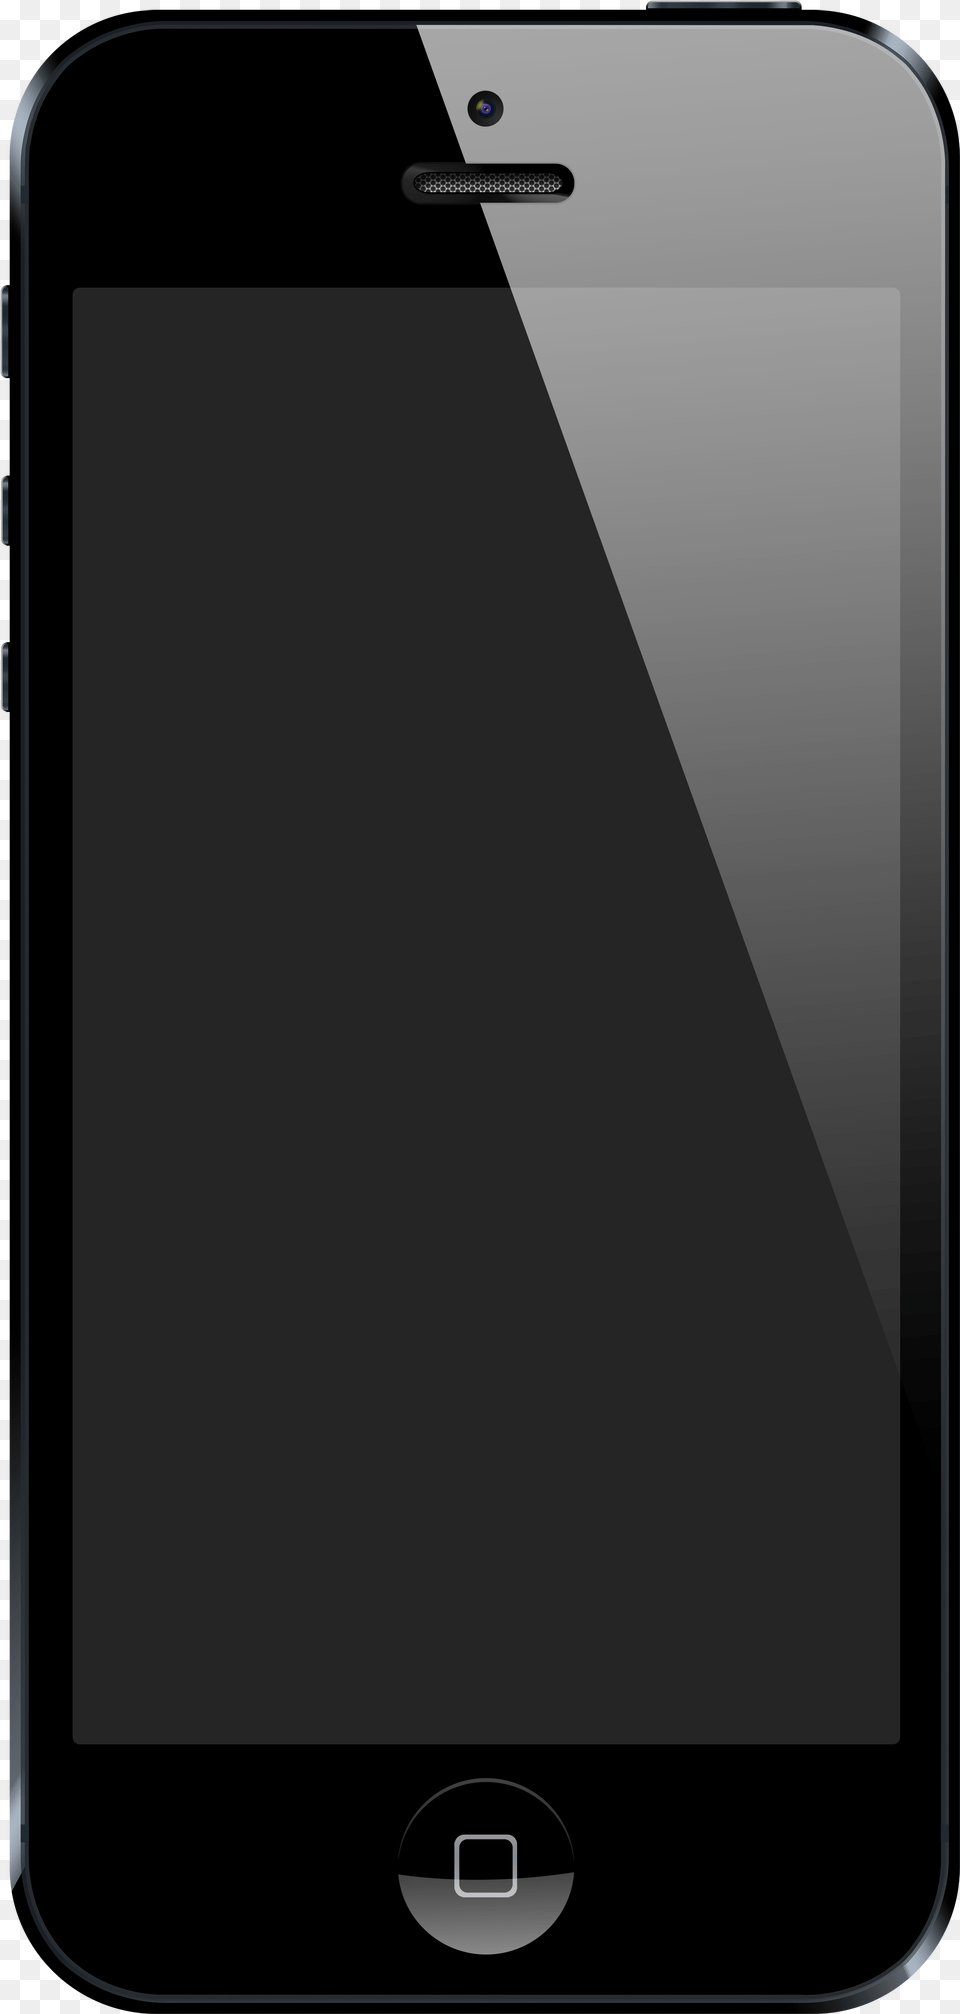 Iphone 5 Template Phones With A Black Screen, Electronics, Mobile Phone, Phone Png Image